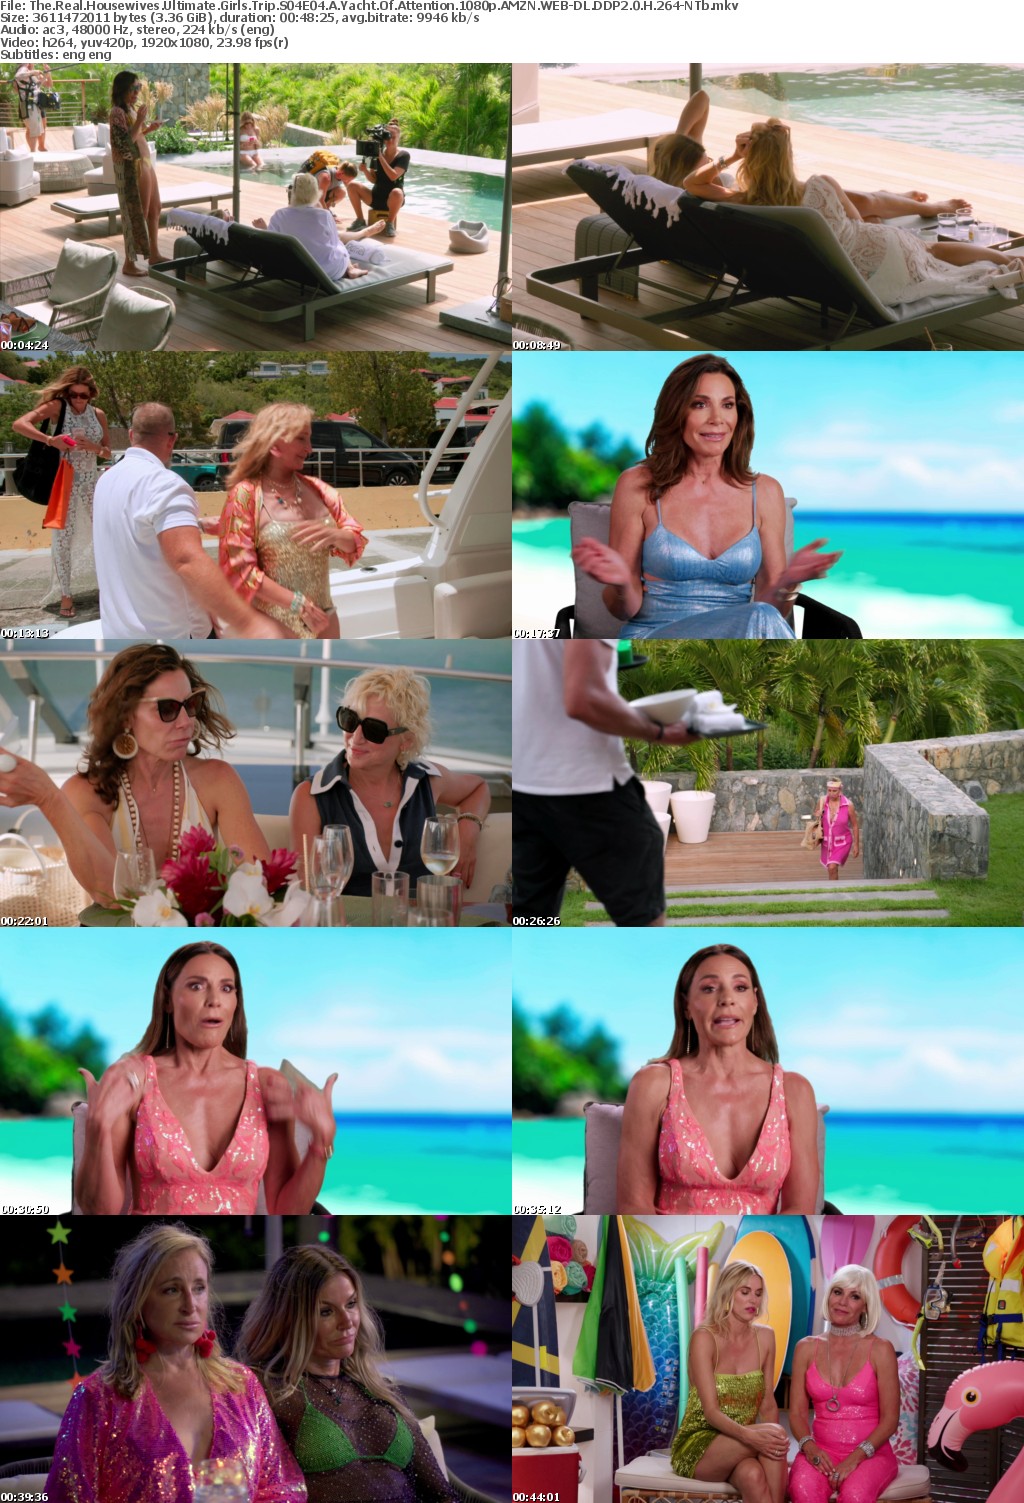 The Real Housewives Ultimate Girls Trip S04E04 A Yacht Of Attention 1080p AMZN WEB-DL DDP2 0 H 264-NTb